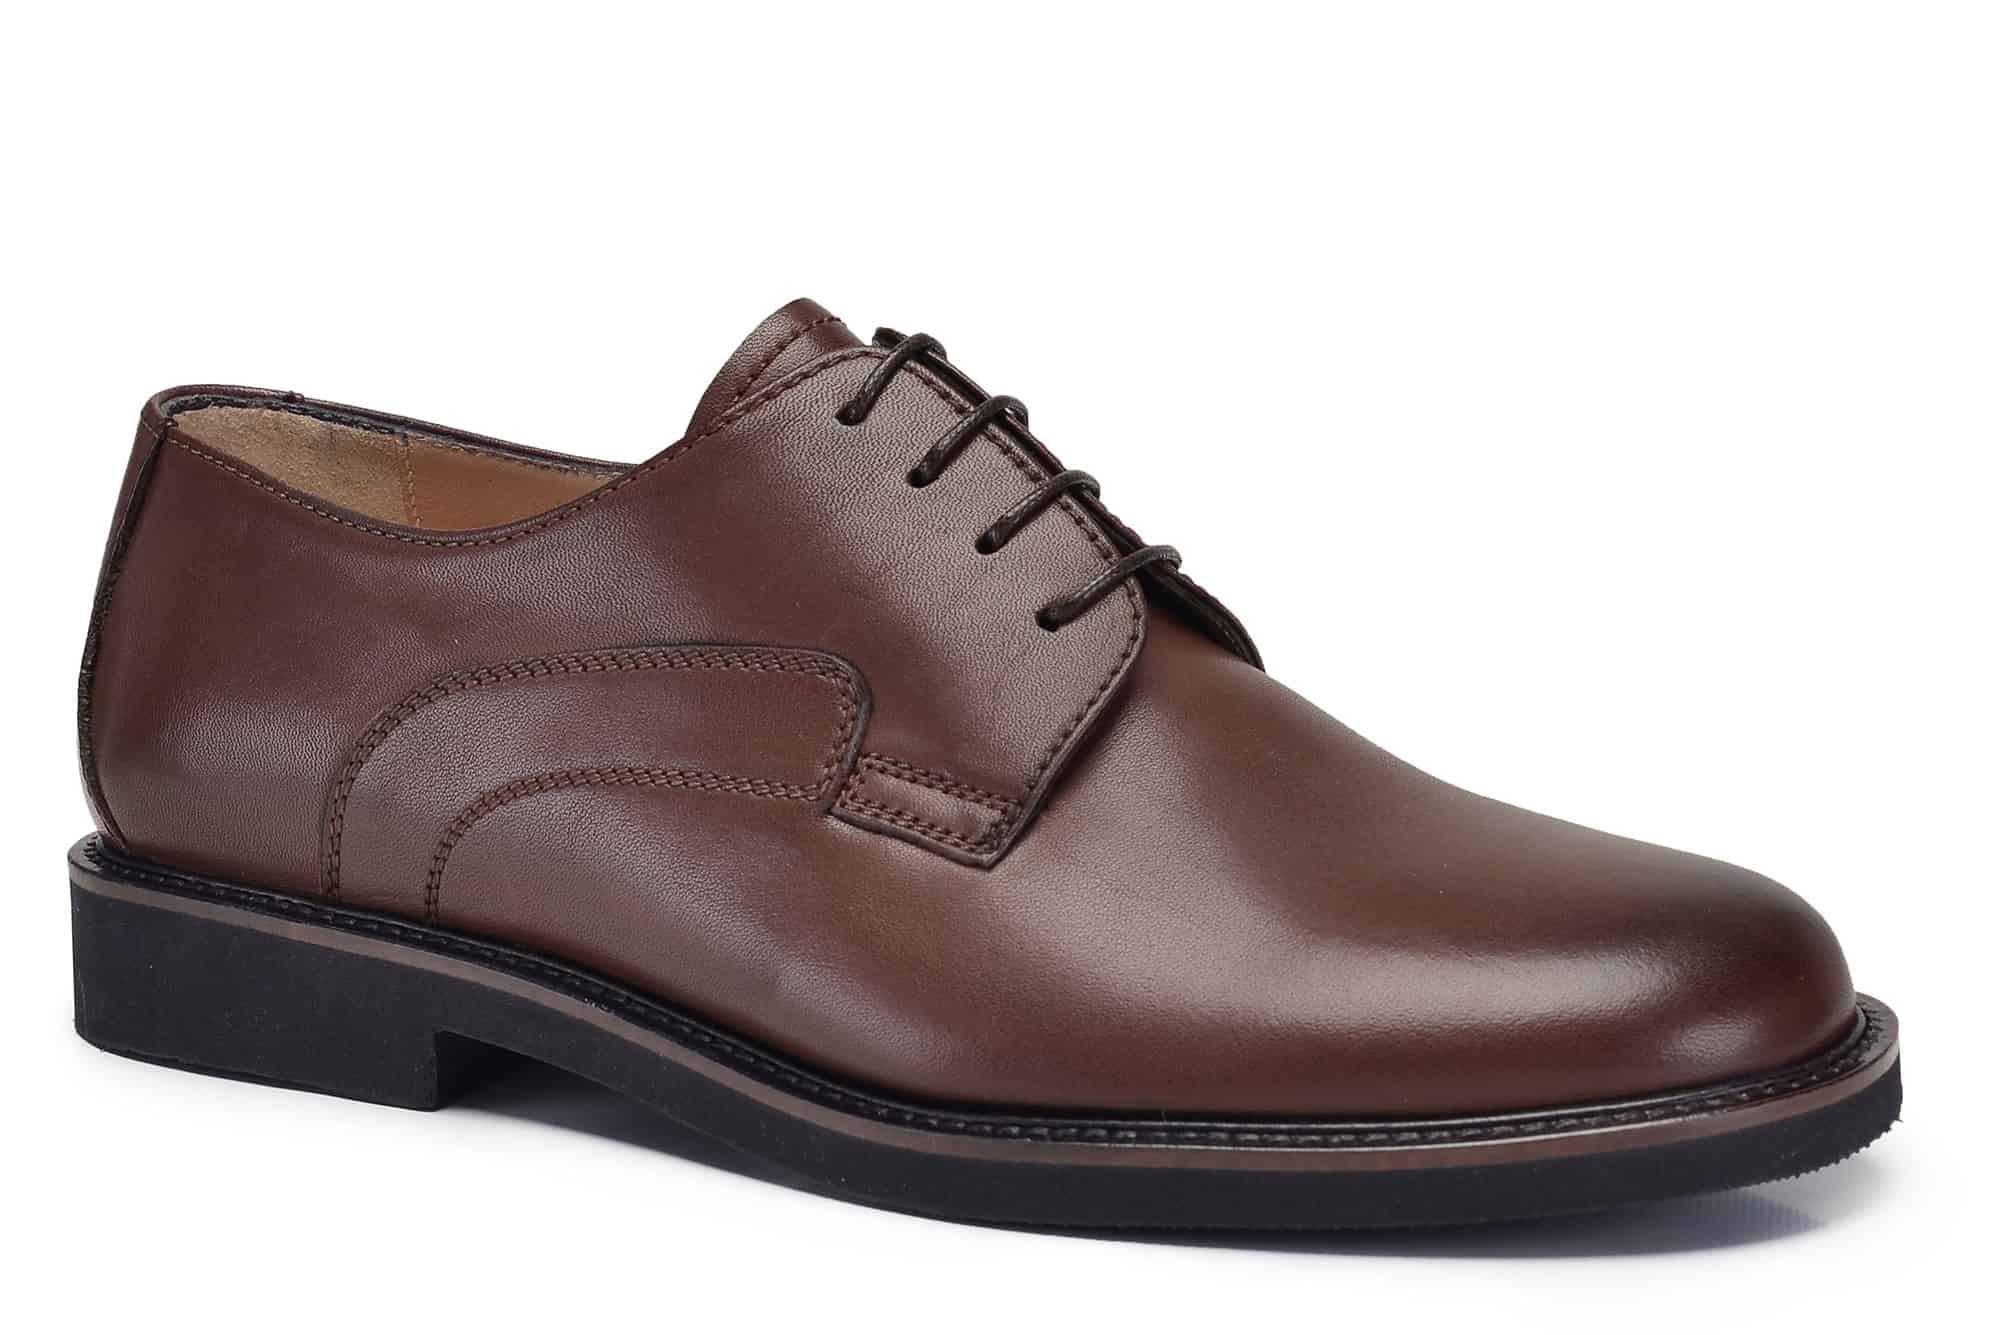 Light Brown Leather Shoes For Men